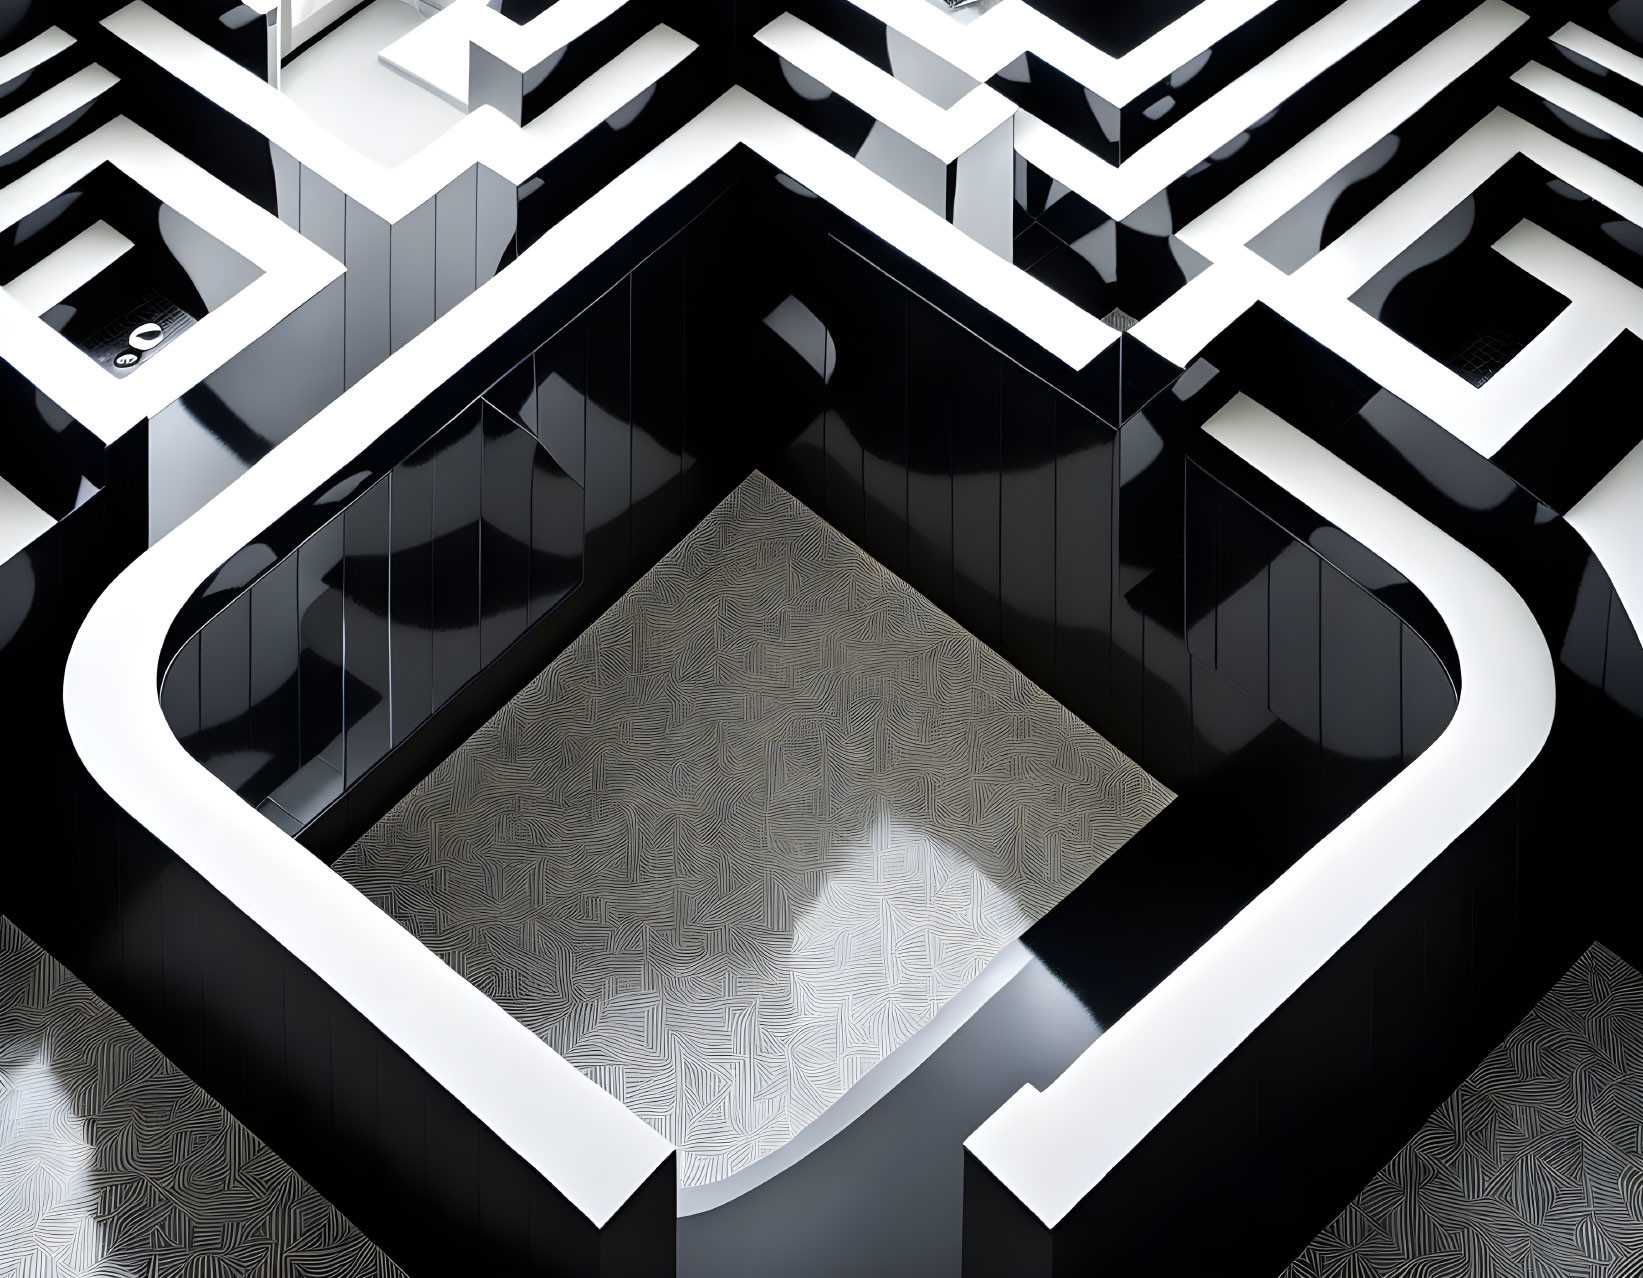 Abstract Black and White Maze-Like Geometric Pattern with Glossy Surfaces